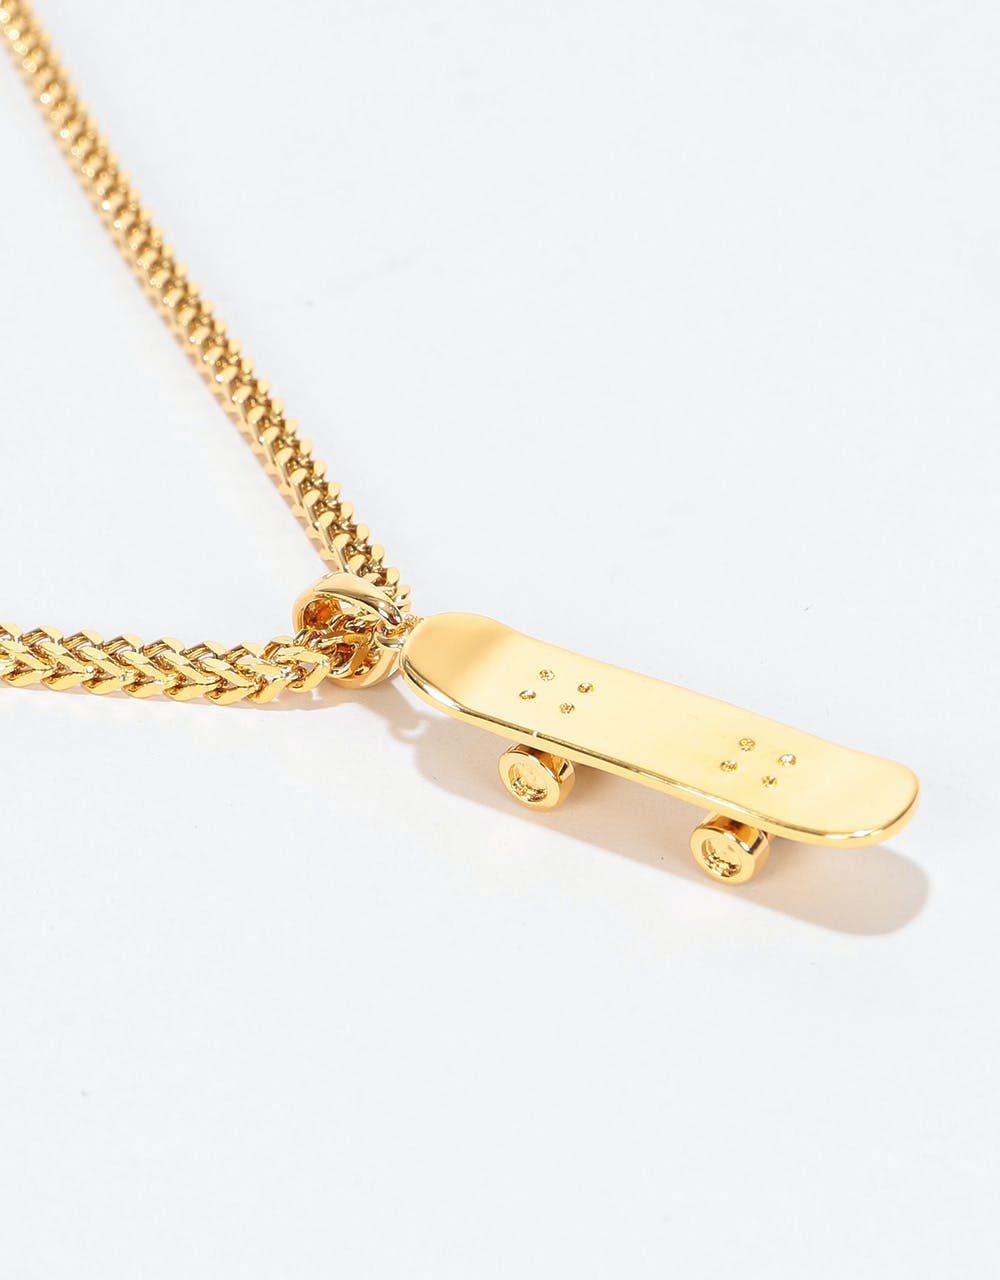 Midvs Co 18K Gold Plated Deck Necklace - Gold